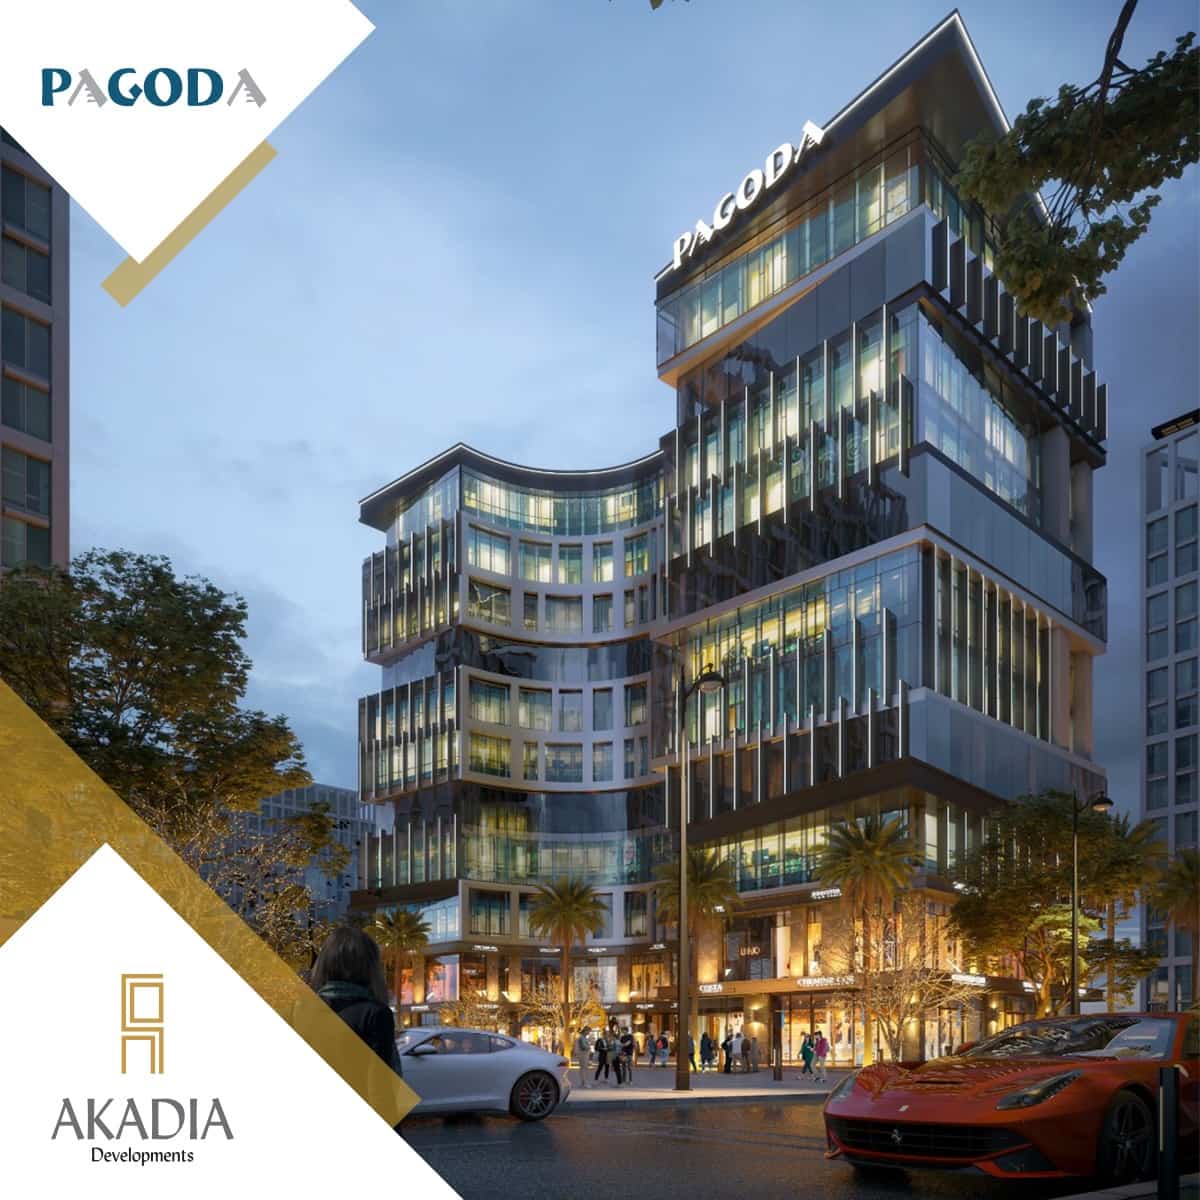 Hurry up to book a shop with an area starting from 48 meters in Pagoda Mall New Capital